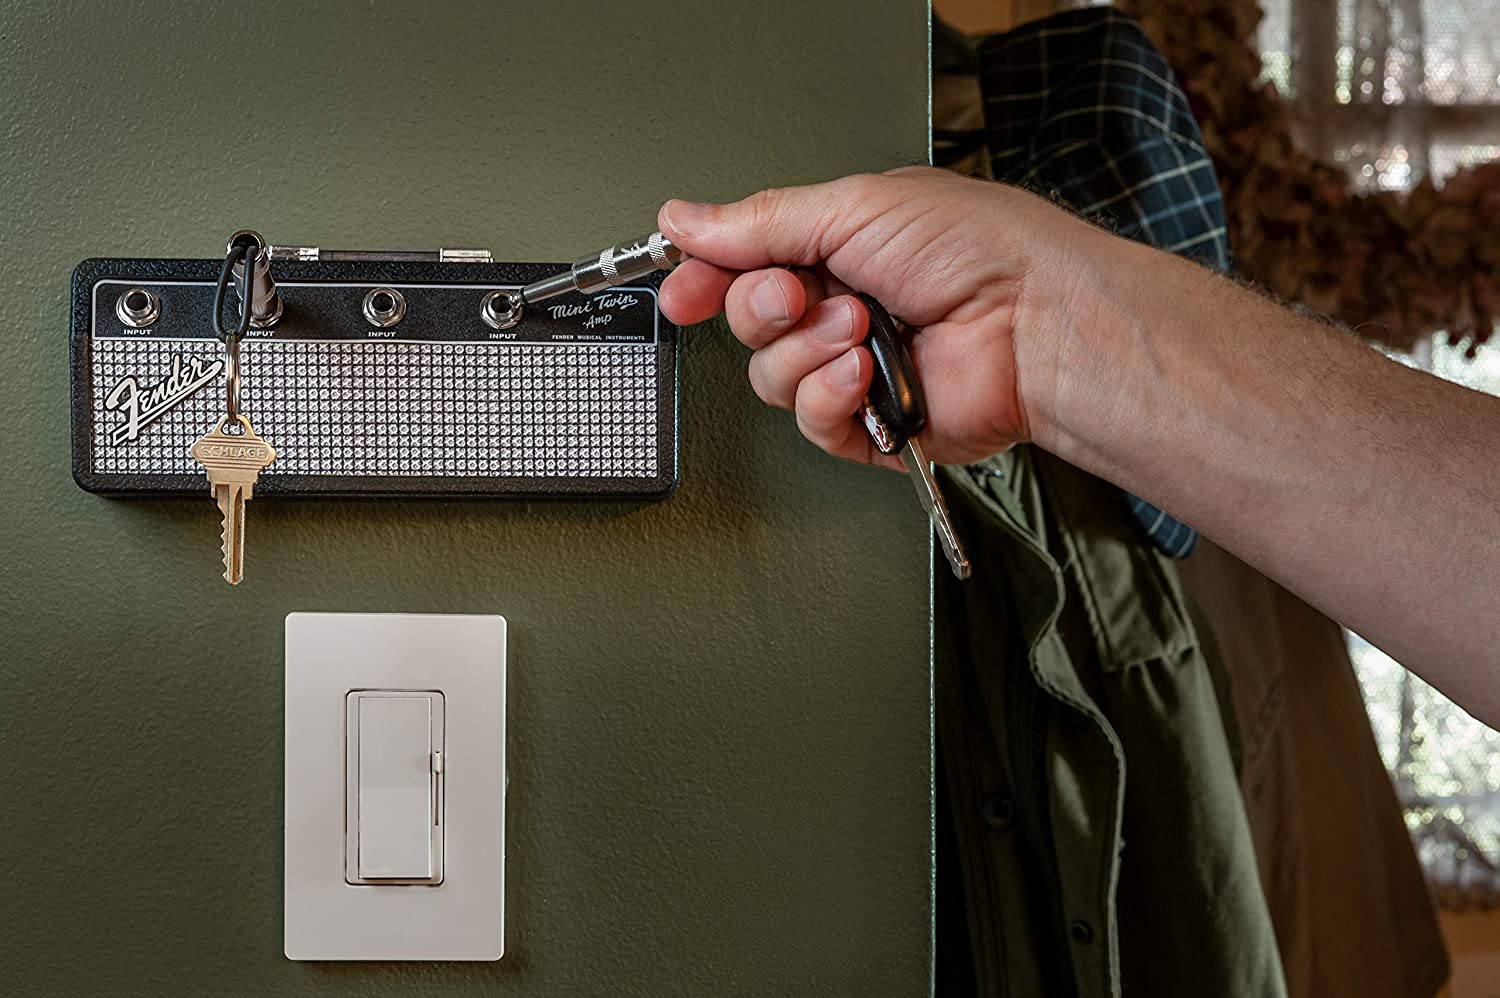 A Fender key rack holder on a green wall. A persons hand is putting one of the included keychain jacks into one of the plugs which holds the keys.